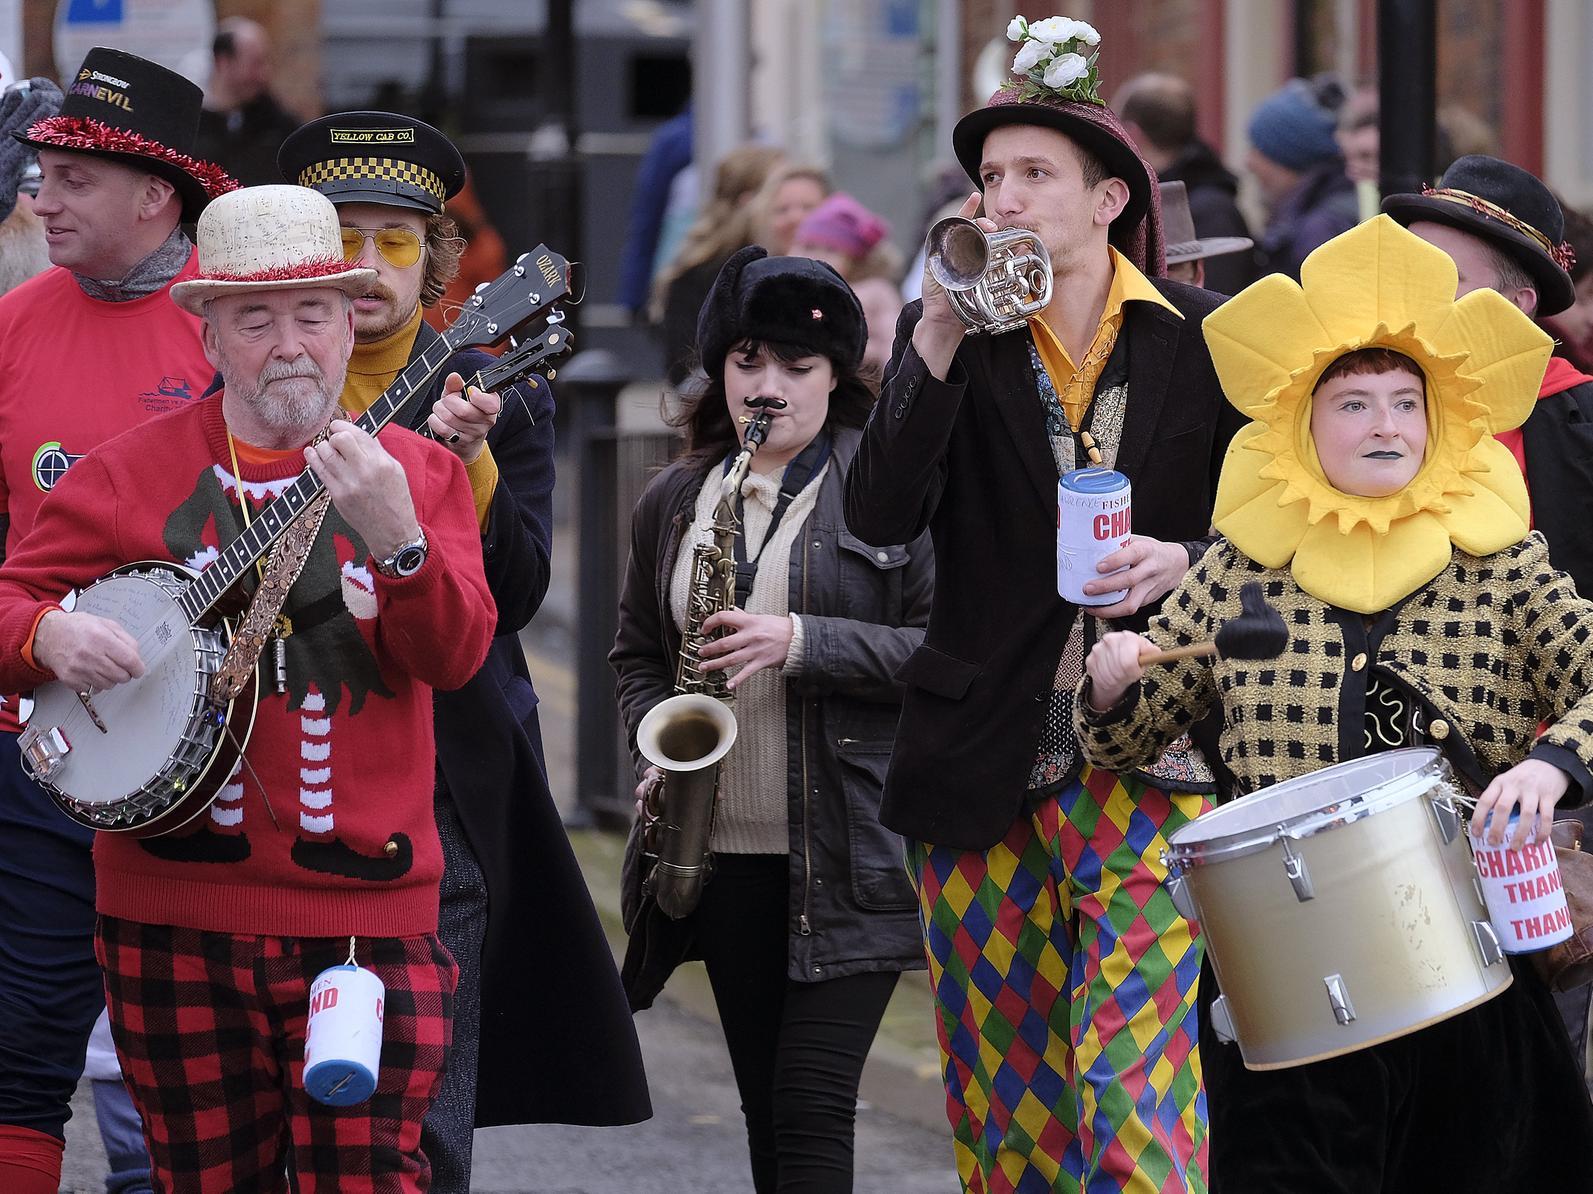 The comic band lead the teams through town.